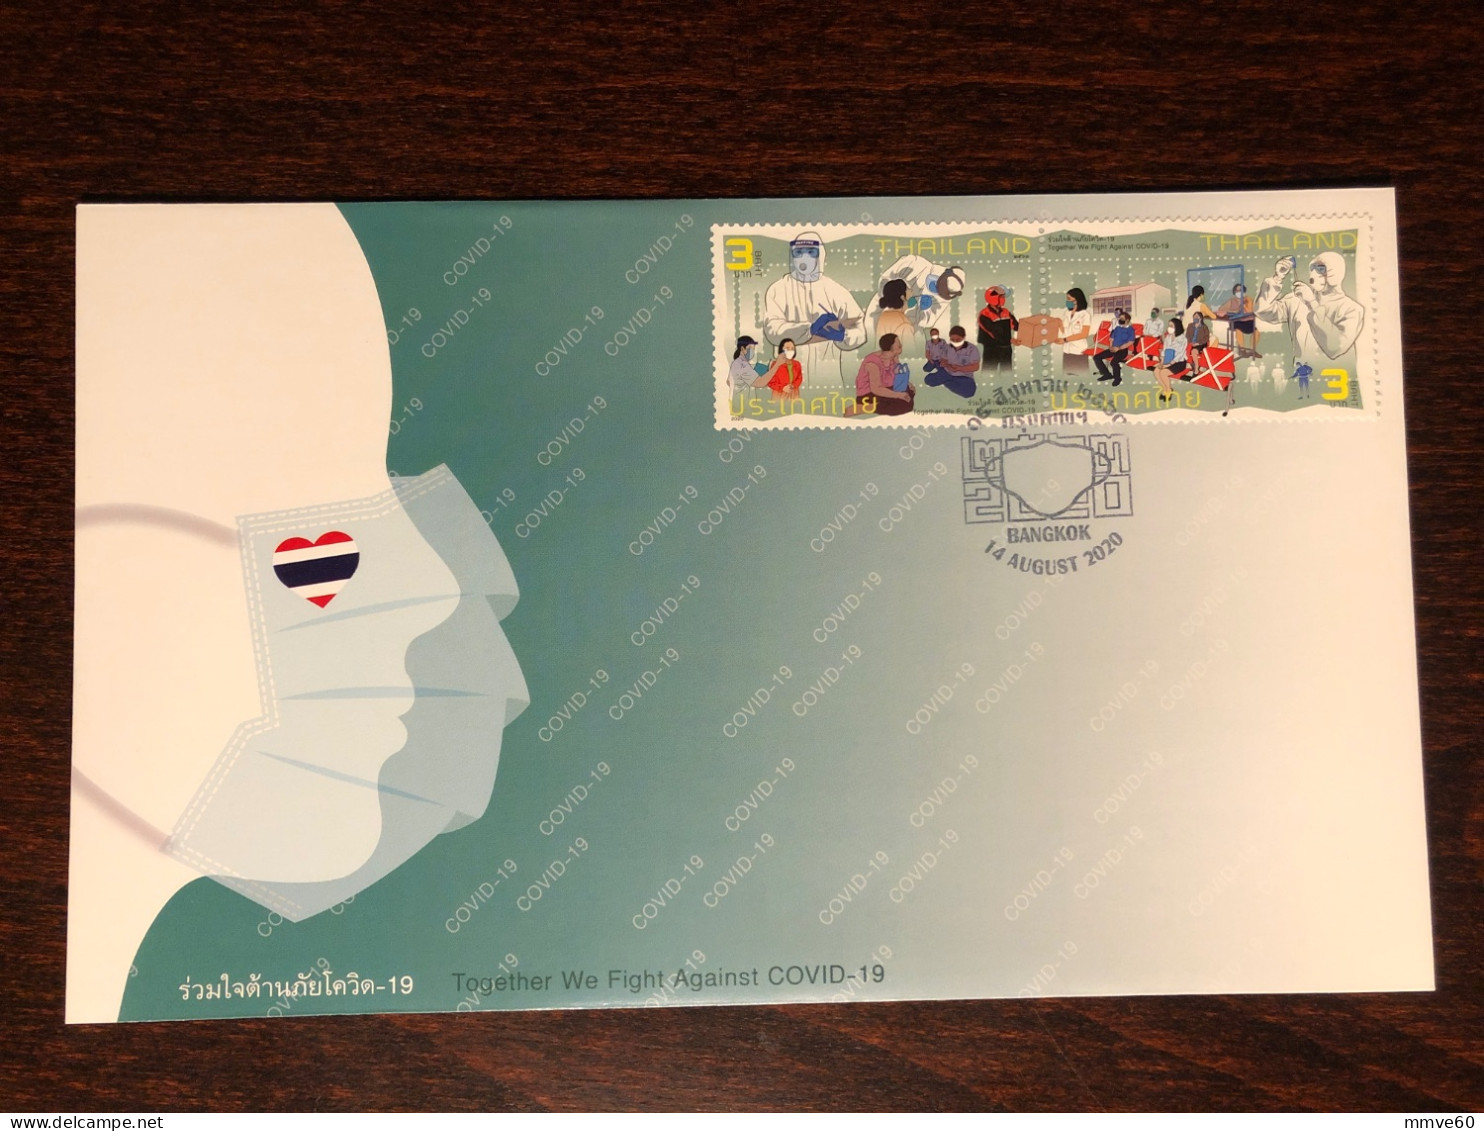 THAILAND FDC COVER 2020 YEAR COVID HEALTH MEDICINE STAMPS - Thailand